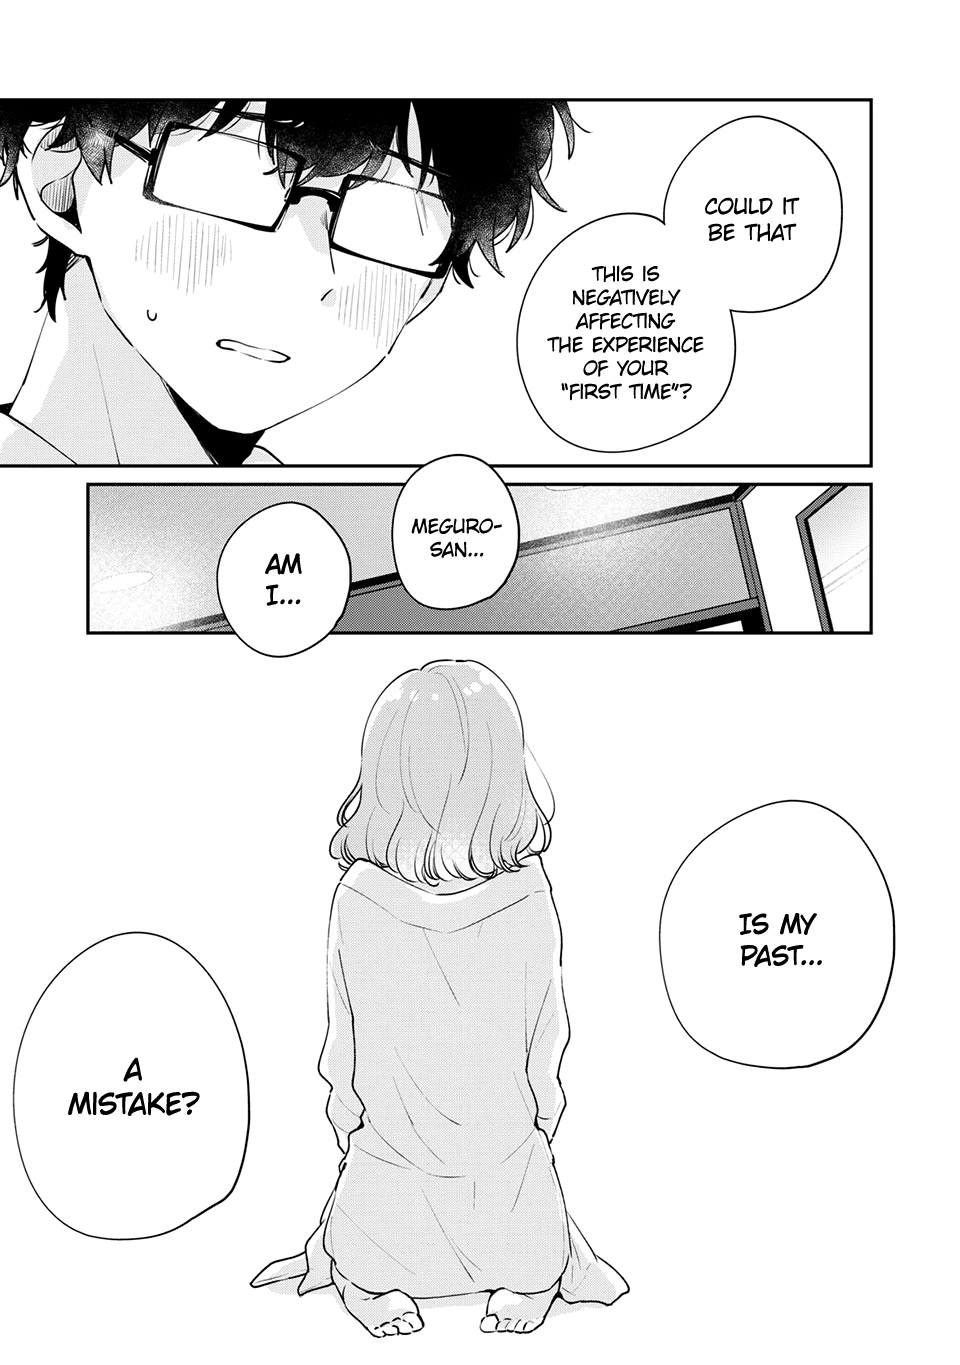 It's Not Meguro-san's First Time chapter 51 page 4